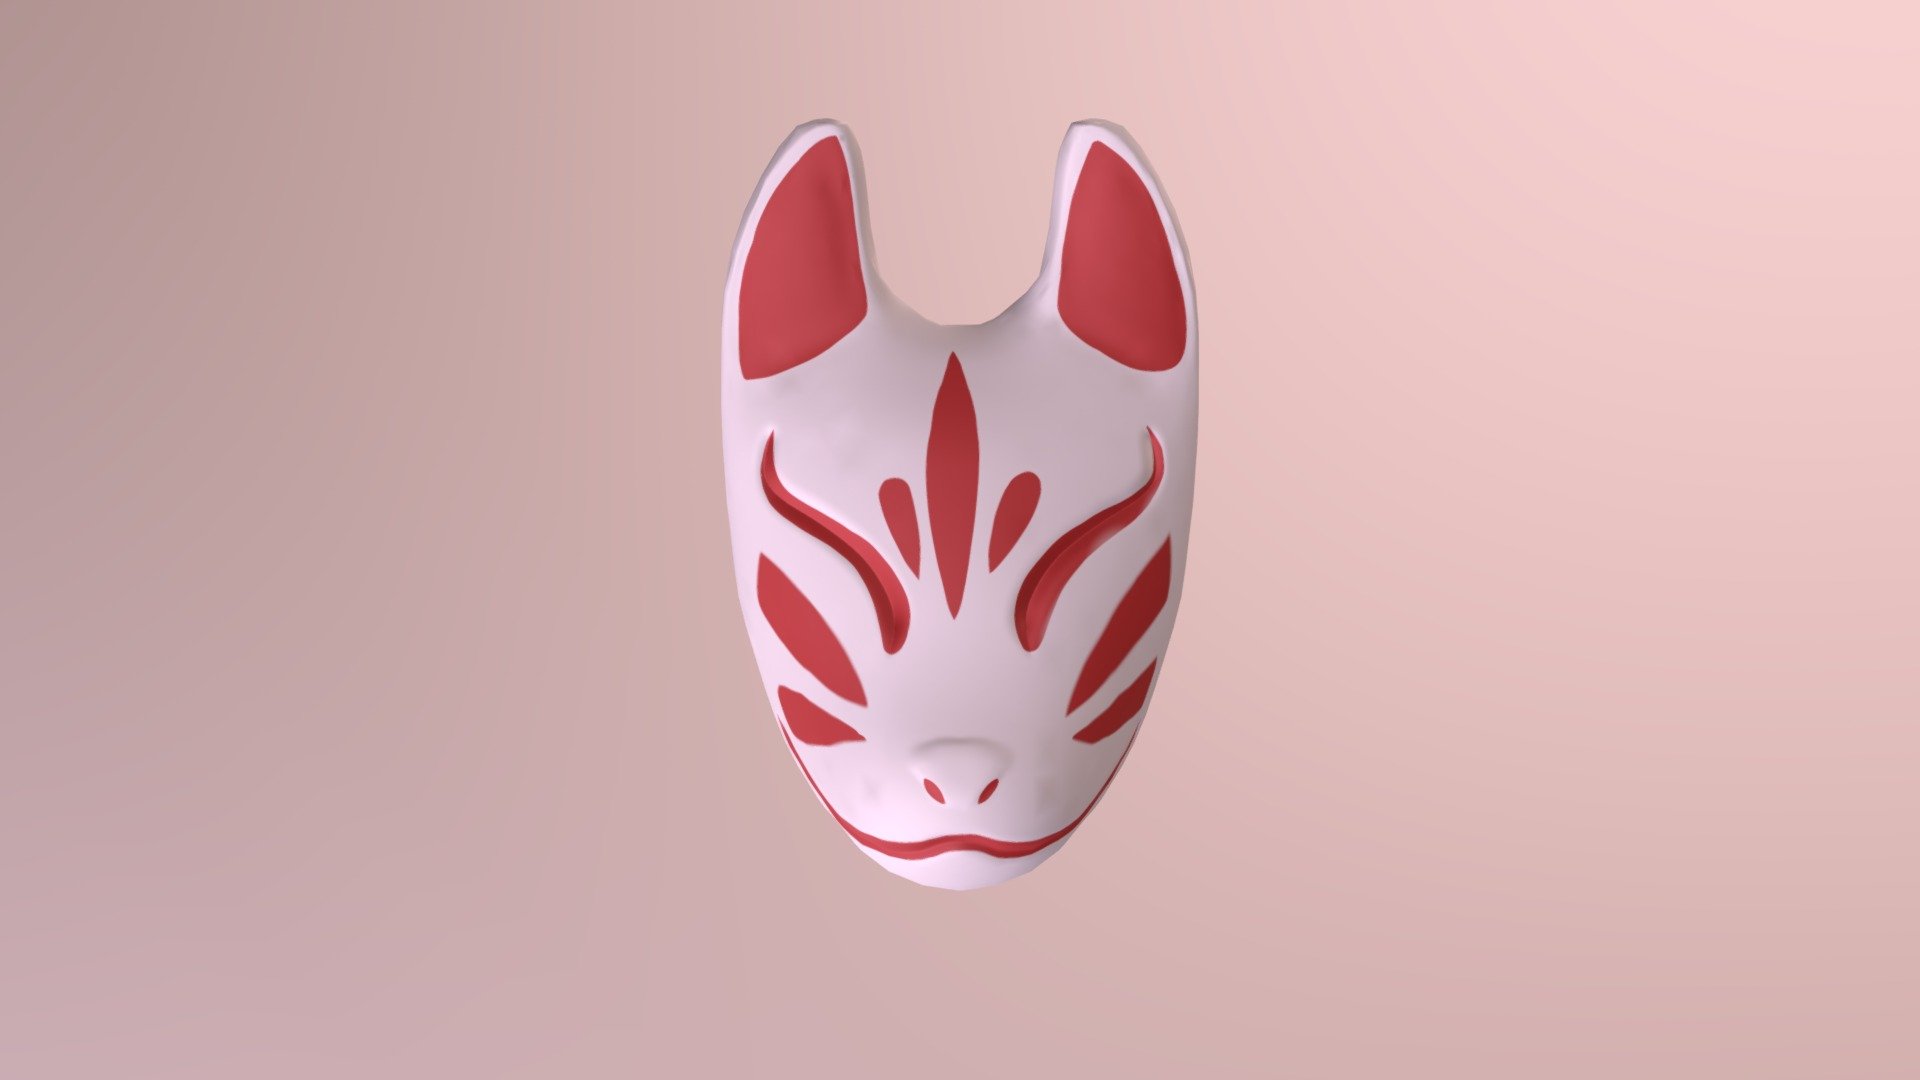 A Kitsune Mask I did for my Japanese Kiosk Uni Project and my first ZBrush Sculpt.
I like how this one turned out. But I definitely could have used less tris 3d model